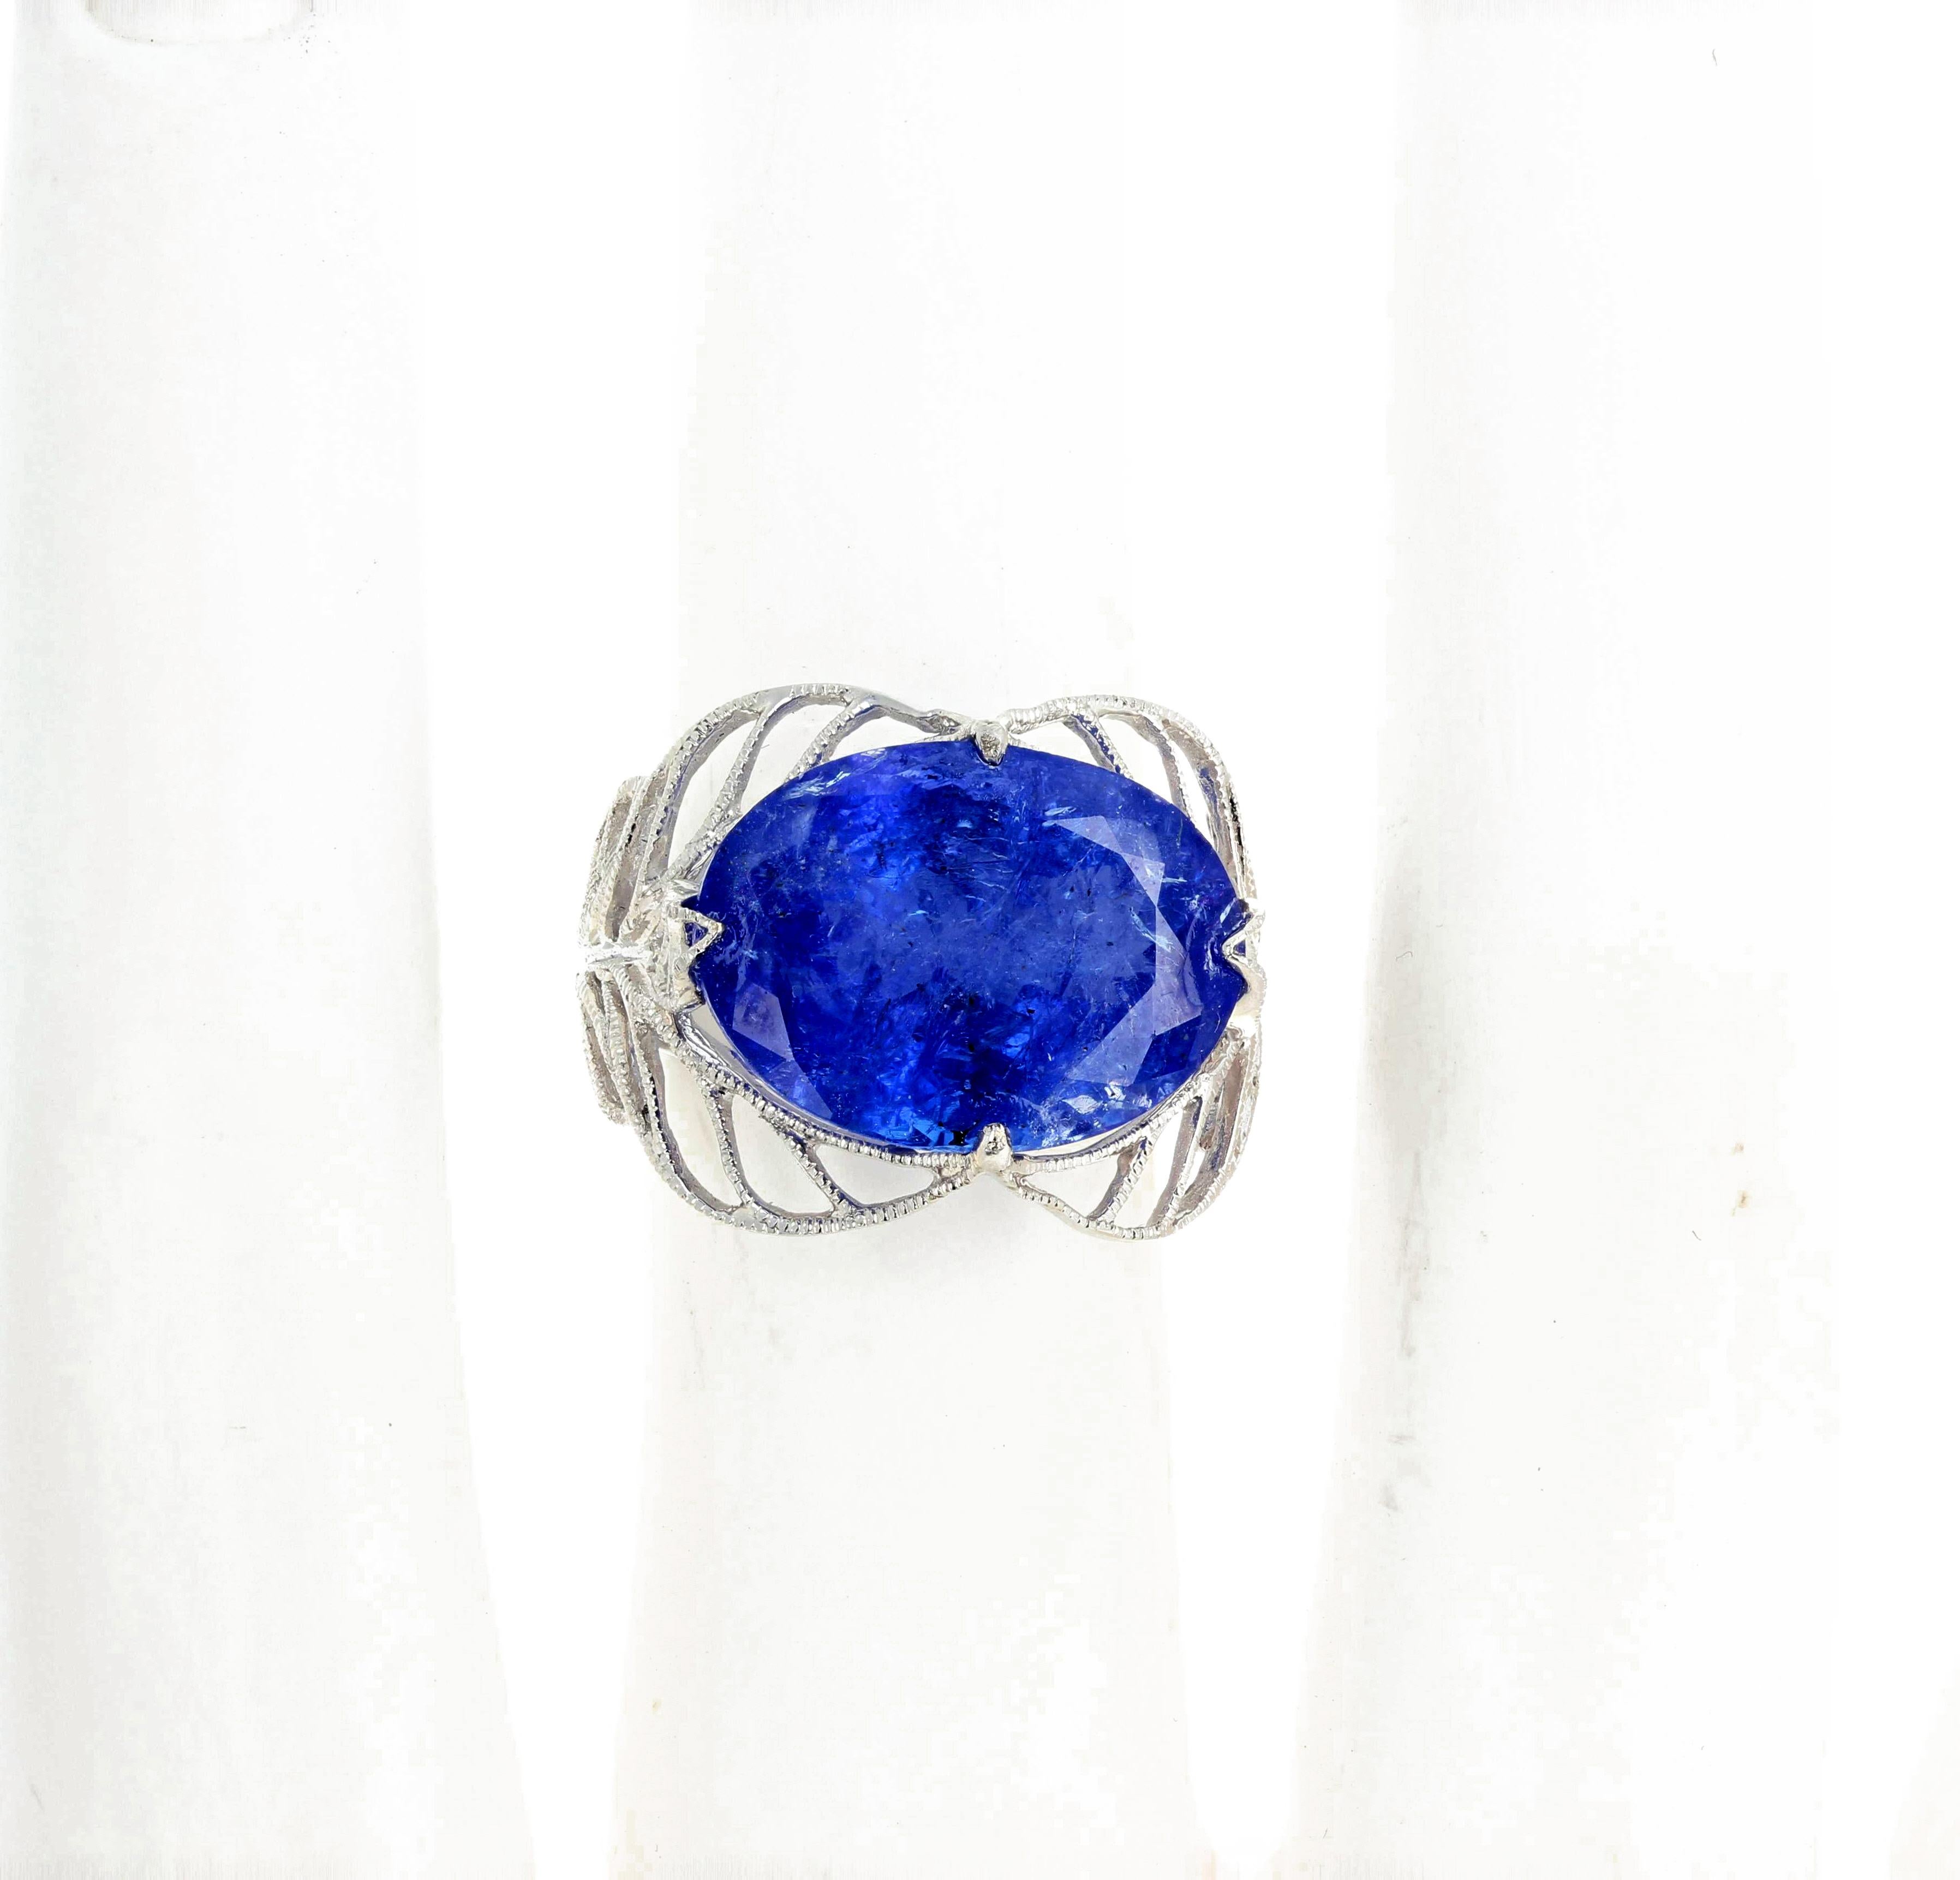 AJD Stunning Rare Gorgeous Blue 12.35 Cts Tanzanite White Gold Ring In New Condition For Sale In Raleigh, NC